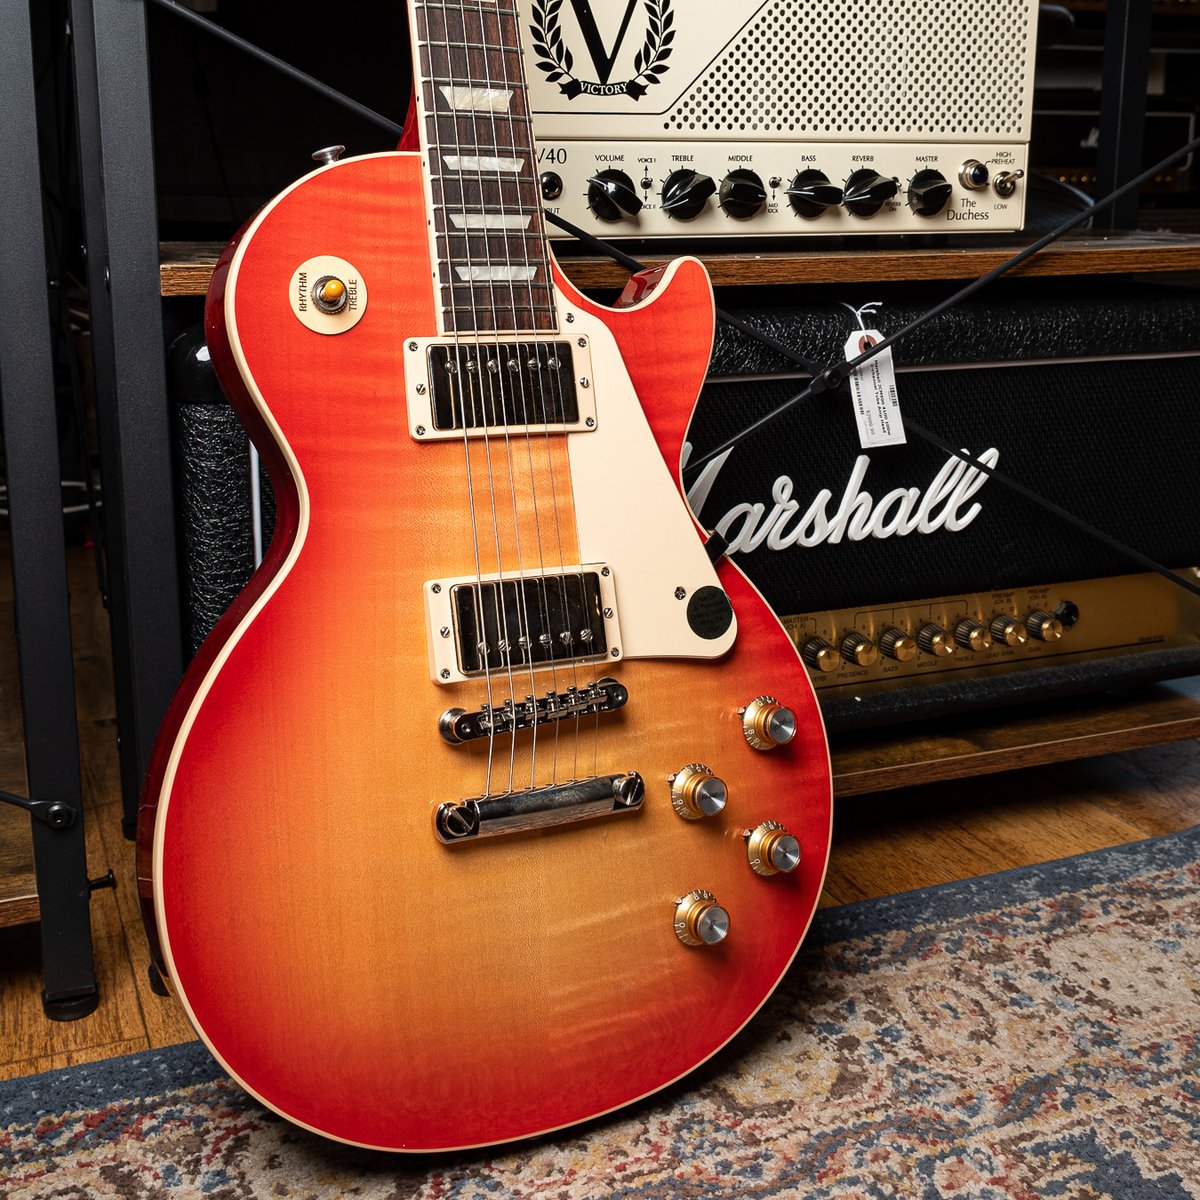 With a burst so vibrant it makes us think of a Campbell’s can, the CME Exclusive Les Paul Standard '60s in Tomato Soup Burst comes equipped with a pair of @gibsonguitar T-Type humbuckers! Check out our CME Exclusive Les Pauls today! bit.ly/31mjPrf